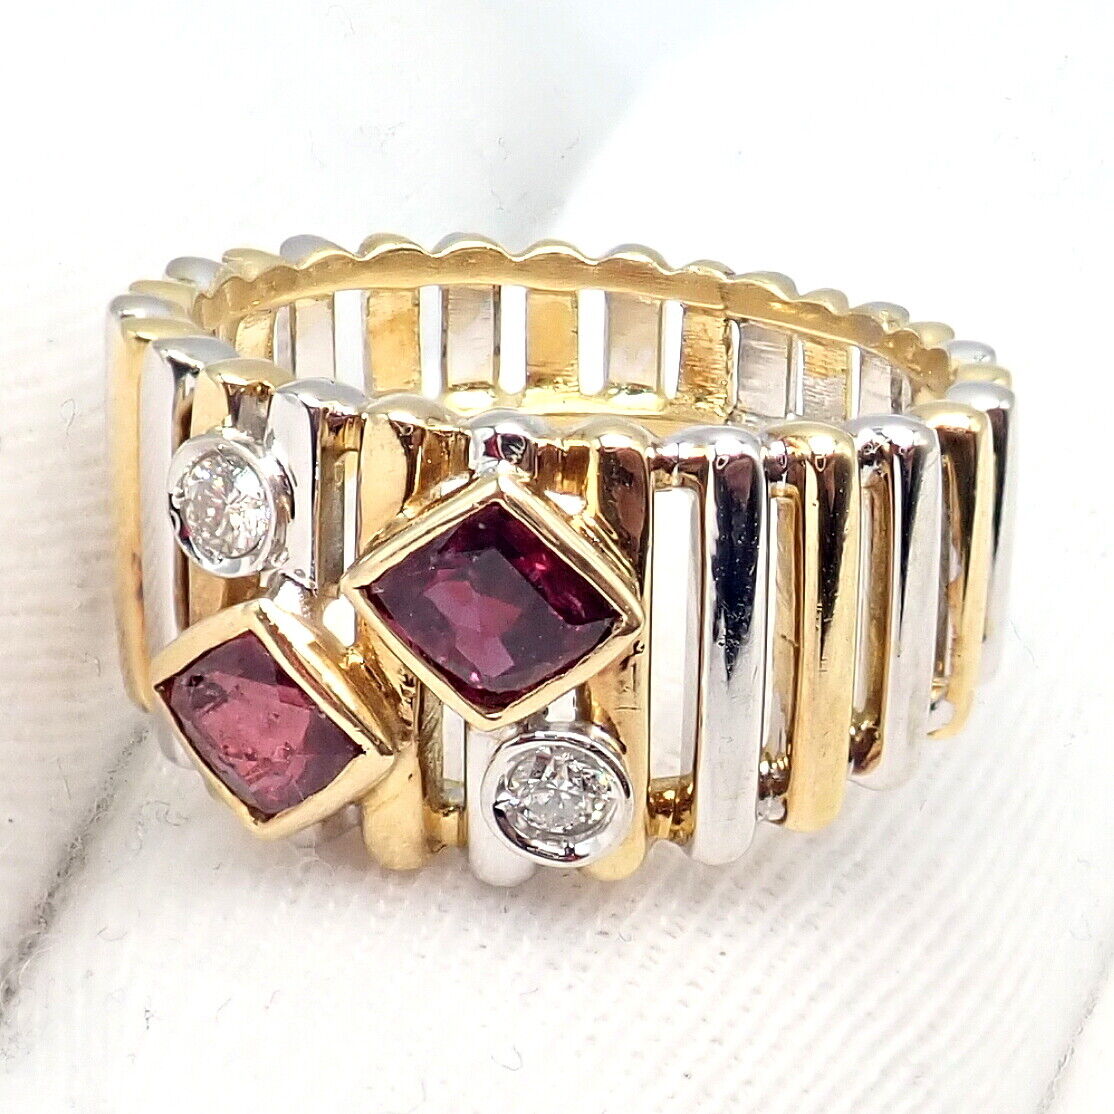 Van Cleef & Arpels Jewelry & Watches:Fine Jewelry:Rings Rare! Authentic Van Cleef & Arpels 18k Yellow + White Gold Diamond Ruby Ring